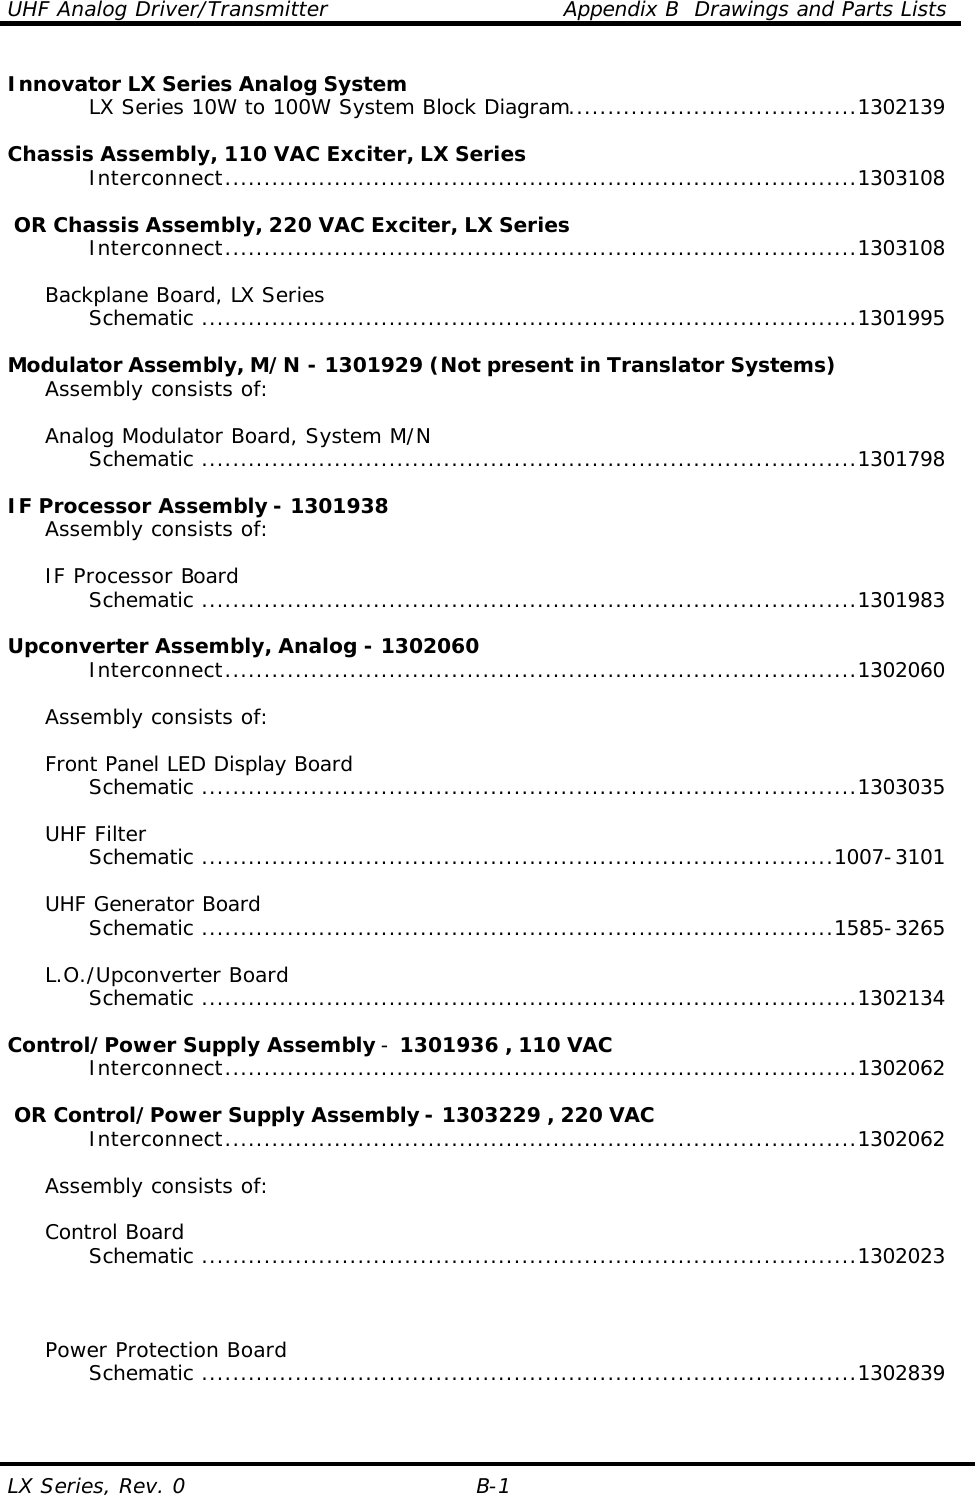 UHF Analog Driver/Transmitter    Appendix B  Drawings and Parts Lists LX Series, Rev. 0 B-1 Innovator LX Series Analog System     LX Series 10W to 100W System Block Diagram.....................................1302139        Chassis Assembly, 110 VAC Exciter, LX Series     Interconnect.................................................................................1303108       OR Chassis Assembly, 220 VAC Exciter, LX Series     Interconnect.................................................................................1303108       Backplane Board, LX Series     Schematic ....................................................................................1301995      Modulator Assembly, M/N - 1301929 (Not present in Translator Systems)  Assembly consists of:   Analog Modulator Board, System M/N     Schematic ....................................................................................1301798      IF Processor Assembly - 1301938  Assembly consists of:   IF Processor Board     Schematic ....................................................................................1301983      Upconverter Assembly, Analog - 1302060     Interconnect.................................................................................1302060       Assembly consists of:   Front Panel LED Display Board     Schematic ....................................................................................1303035       UHF Filter     Schematic .................................................................................1007-3101       UHF Generator Board     Schematic .................................................................................1585-3265       L.O./Upconverter Board     Schematic ....................................................................................1302134   Control/Power Supply Assembly - 1301936 , 110 VAC     Interconnect.................................................................................1302062       OR Control/Power Supply Assembly - 1303229 , 220 VAC     Interconnect.................................................................................1302062       Assembly consists of:   Control Board     Schematic ....................................................................................1302023         Power Protection Board     Schematic ....................................................................................1302839    